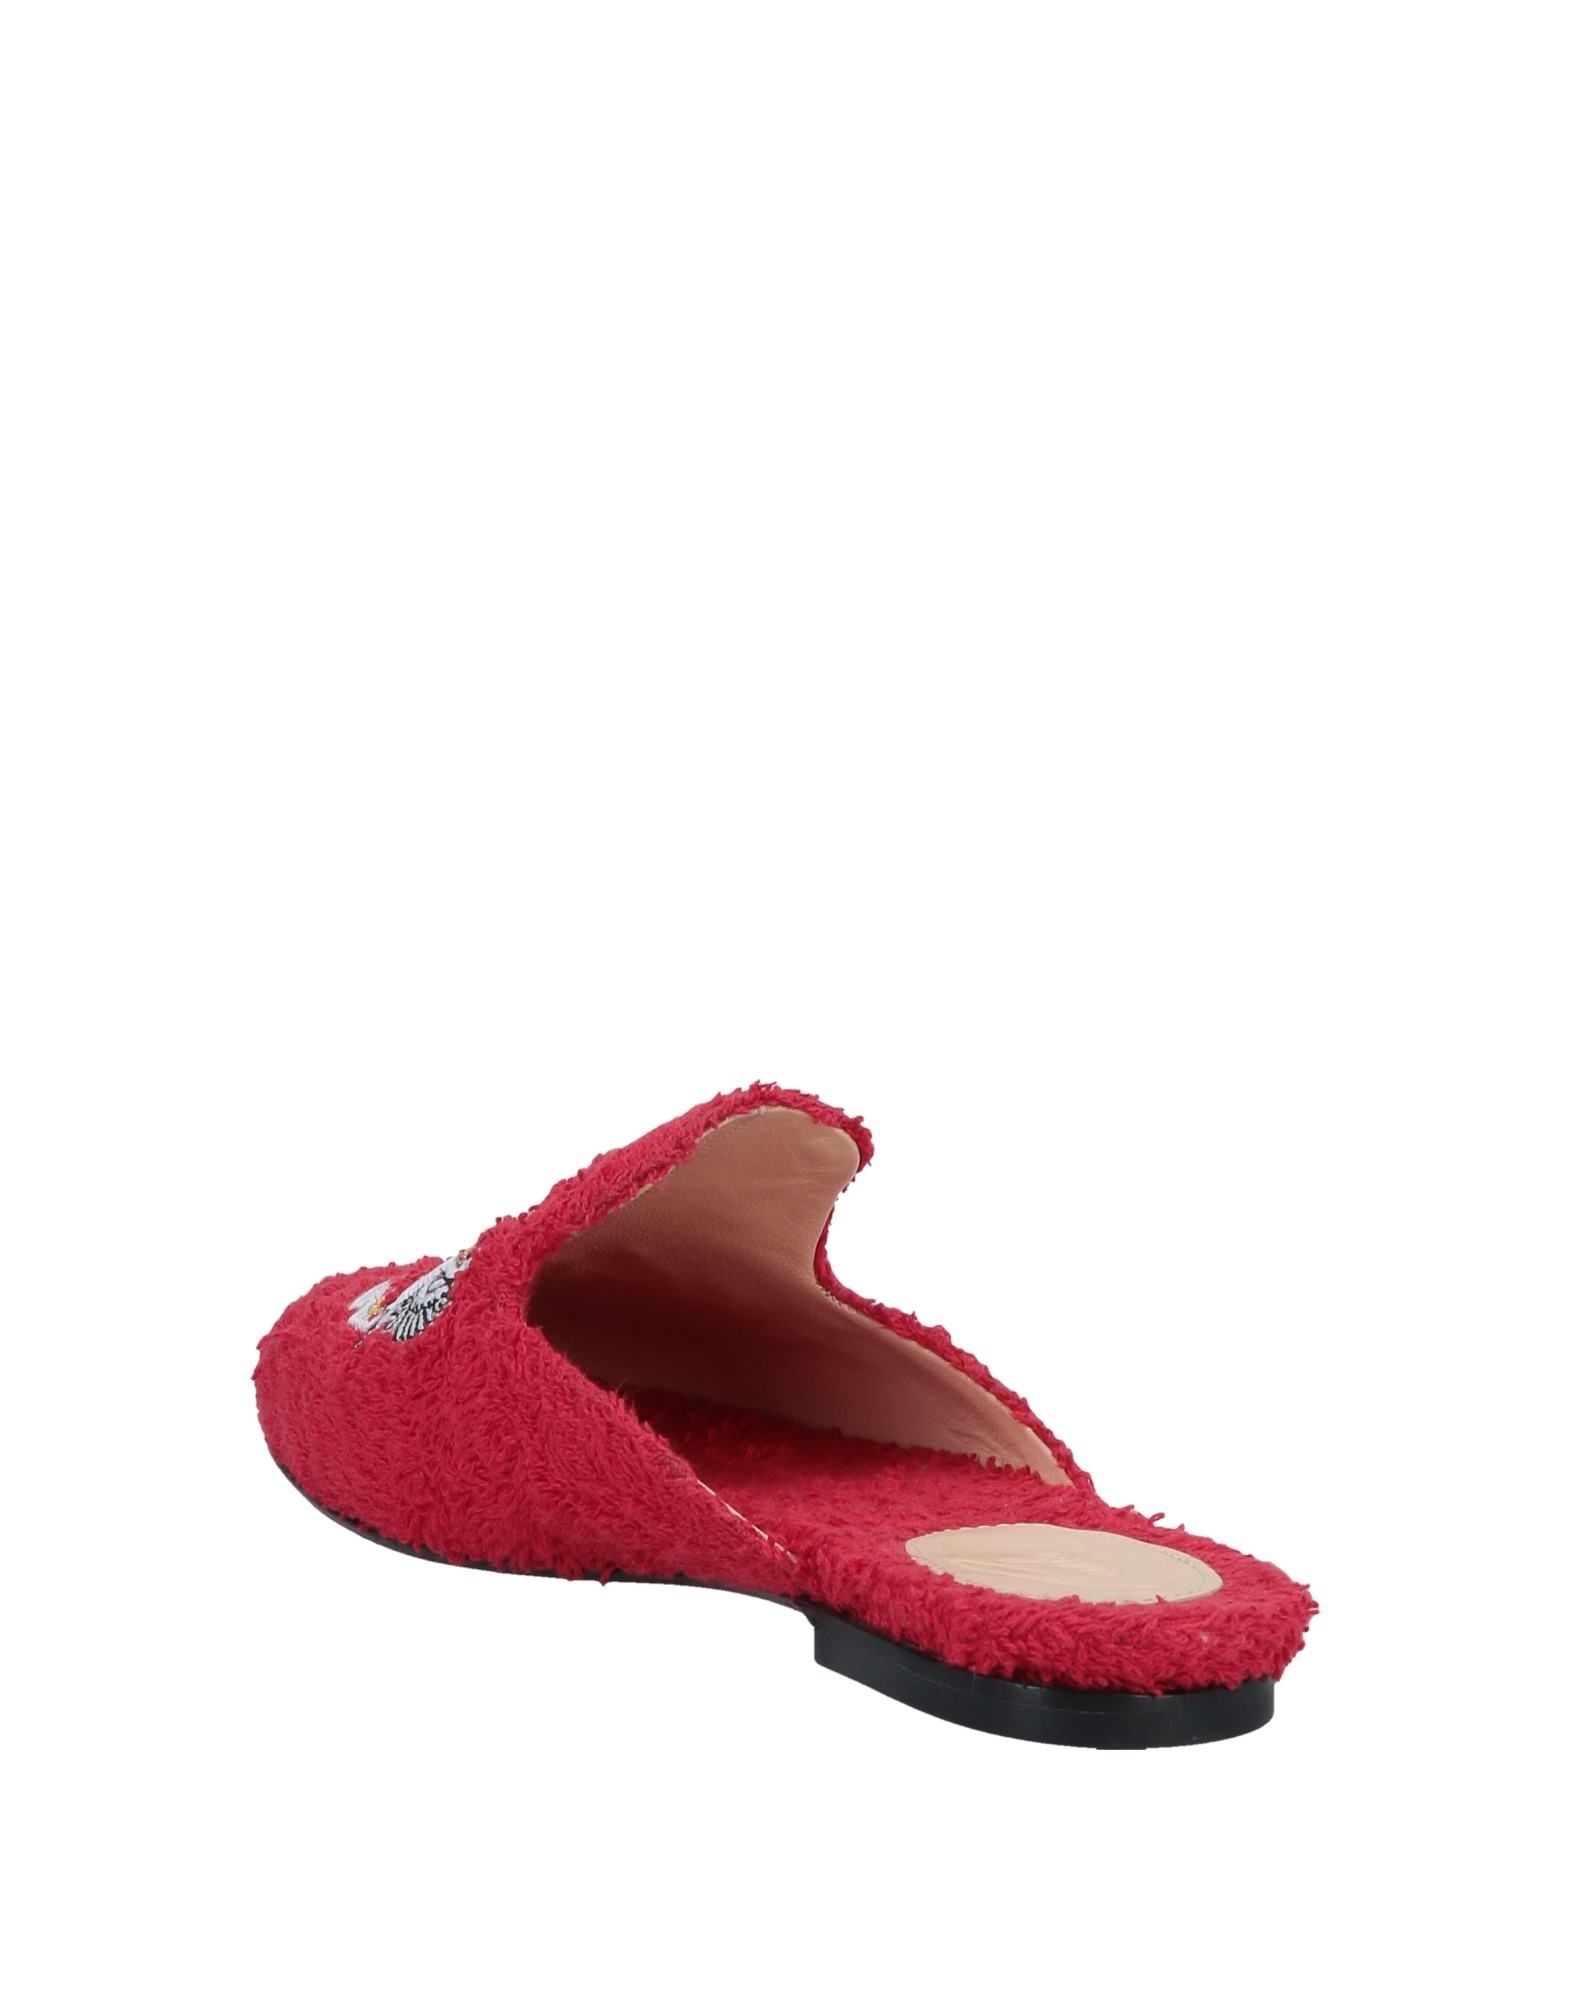 terrycloth, embroidered detailing, solid colour, round toeline, flat, leather lining, leather sole, contains non-textile parts of animal origin, mules